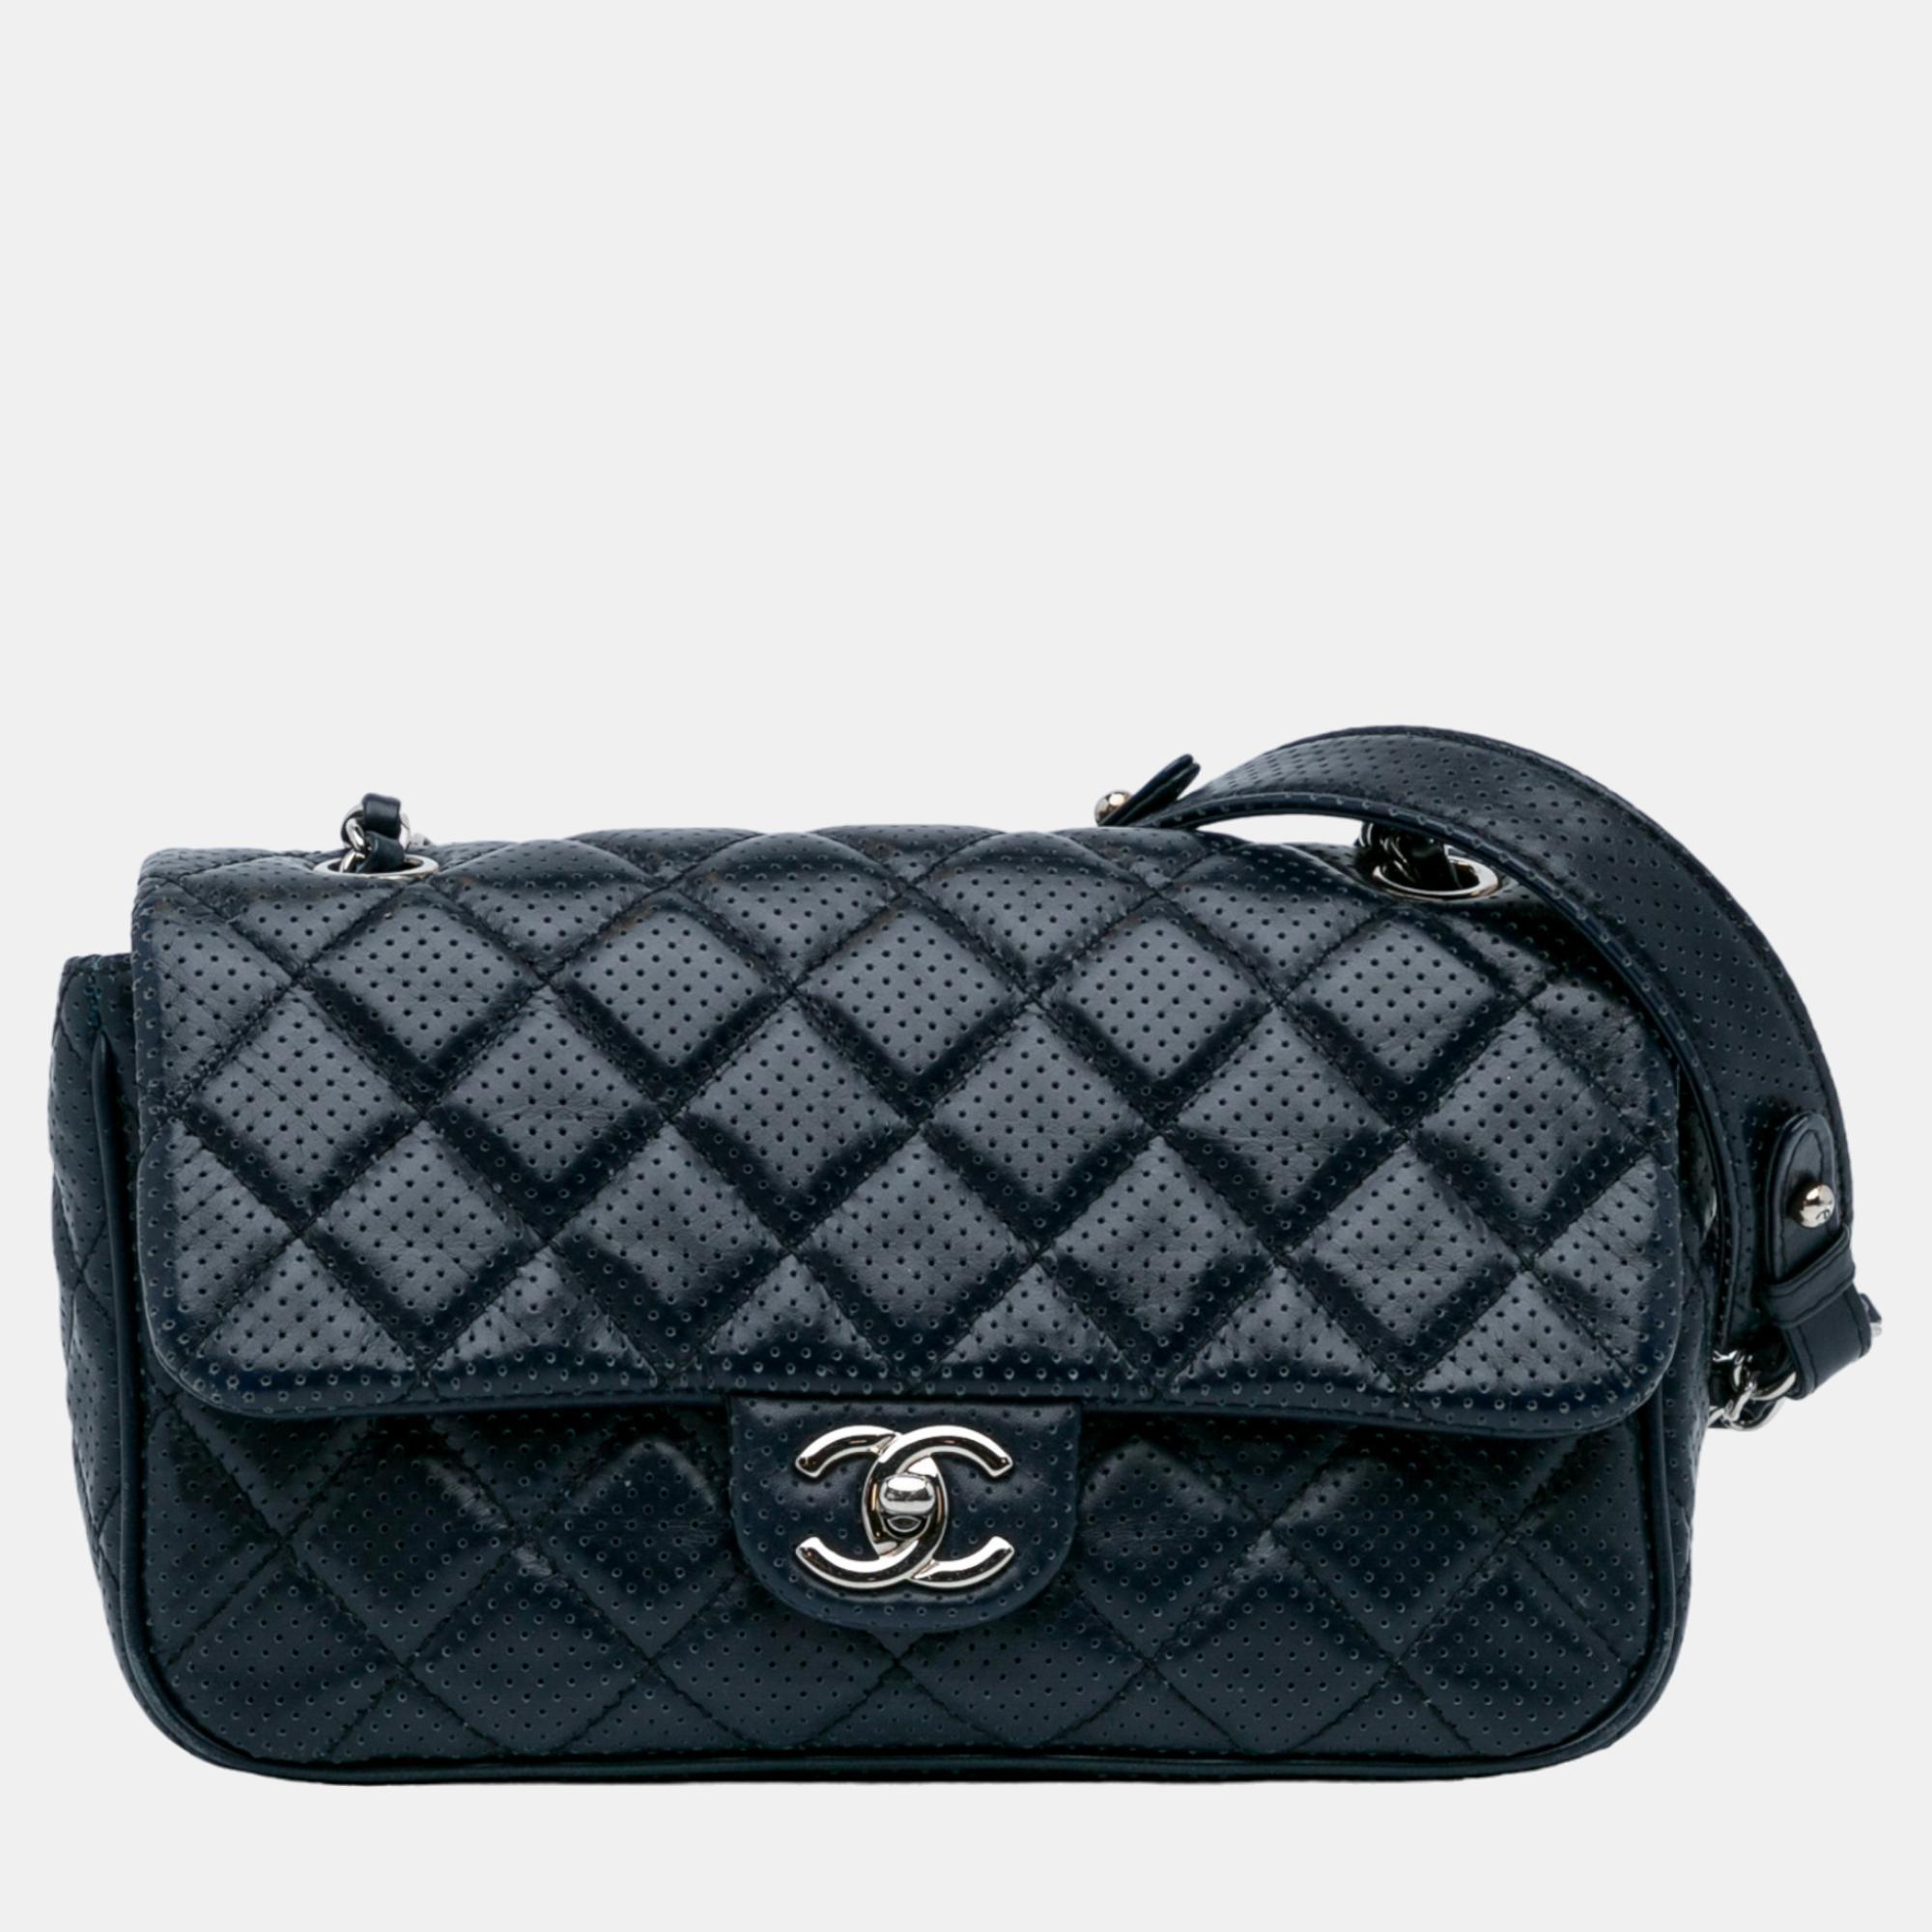 Chanel navy blue perforated classic mini rectangular flap